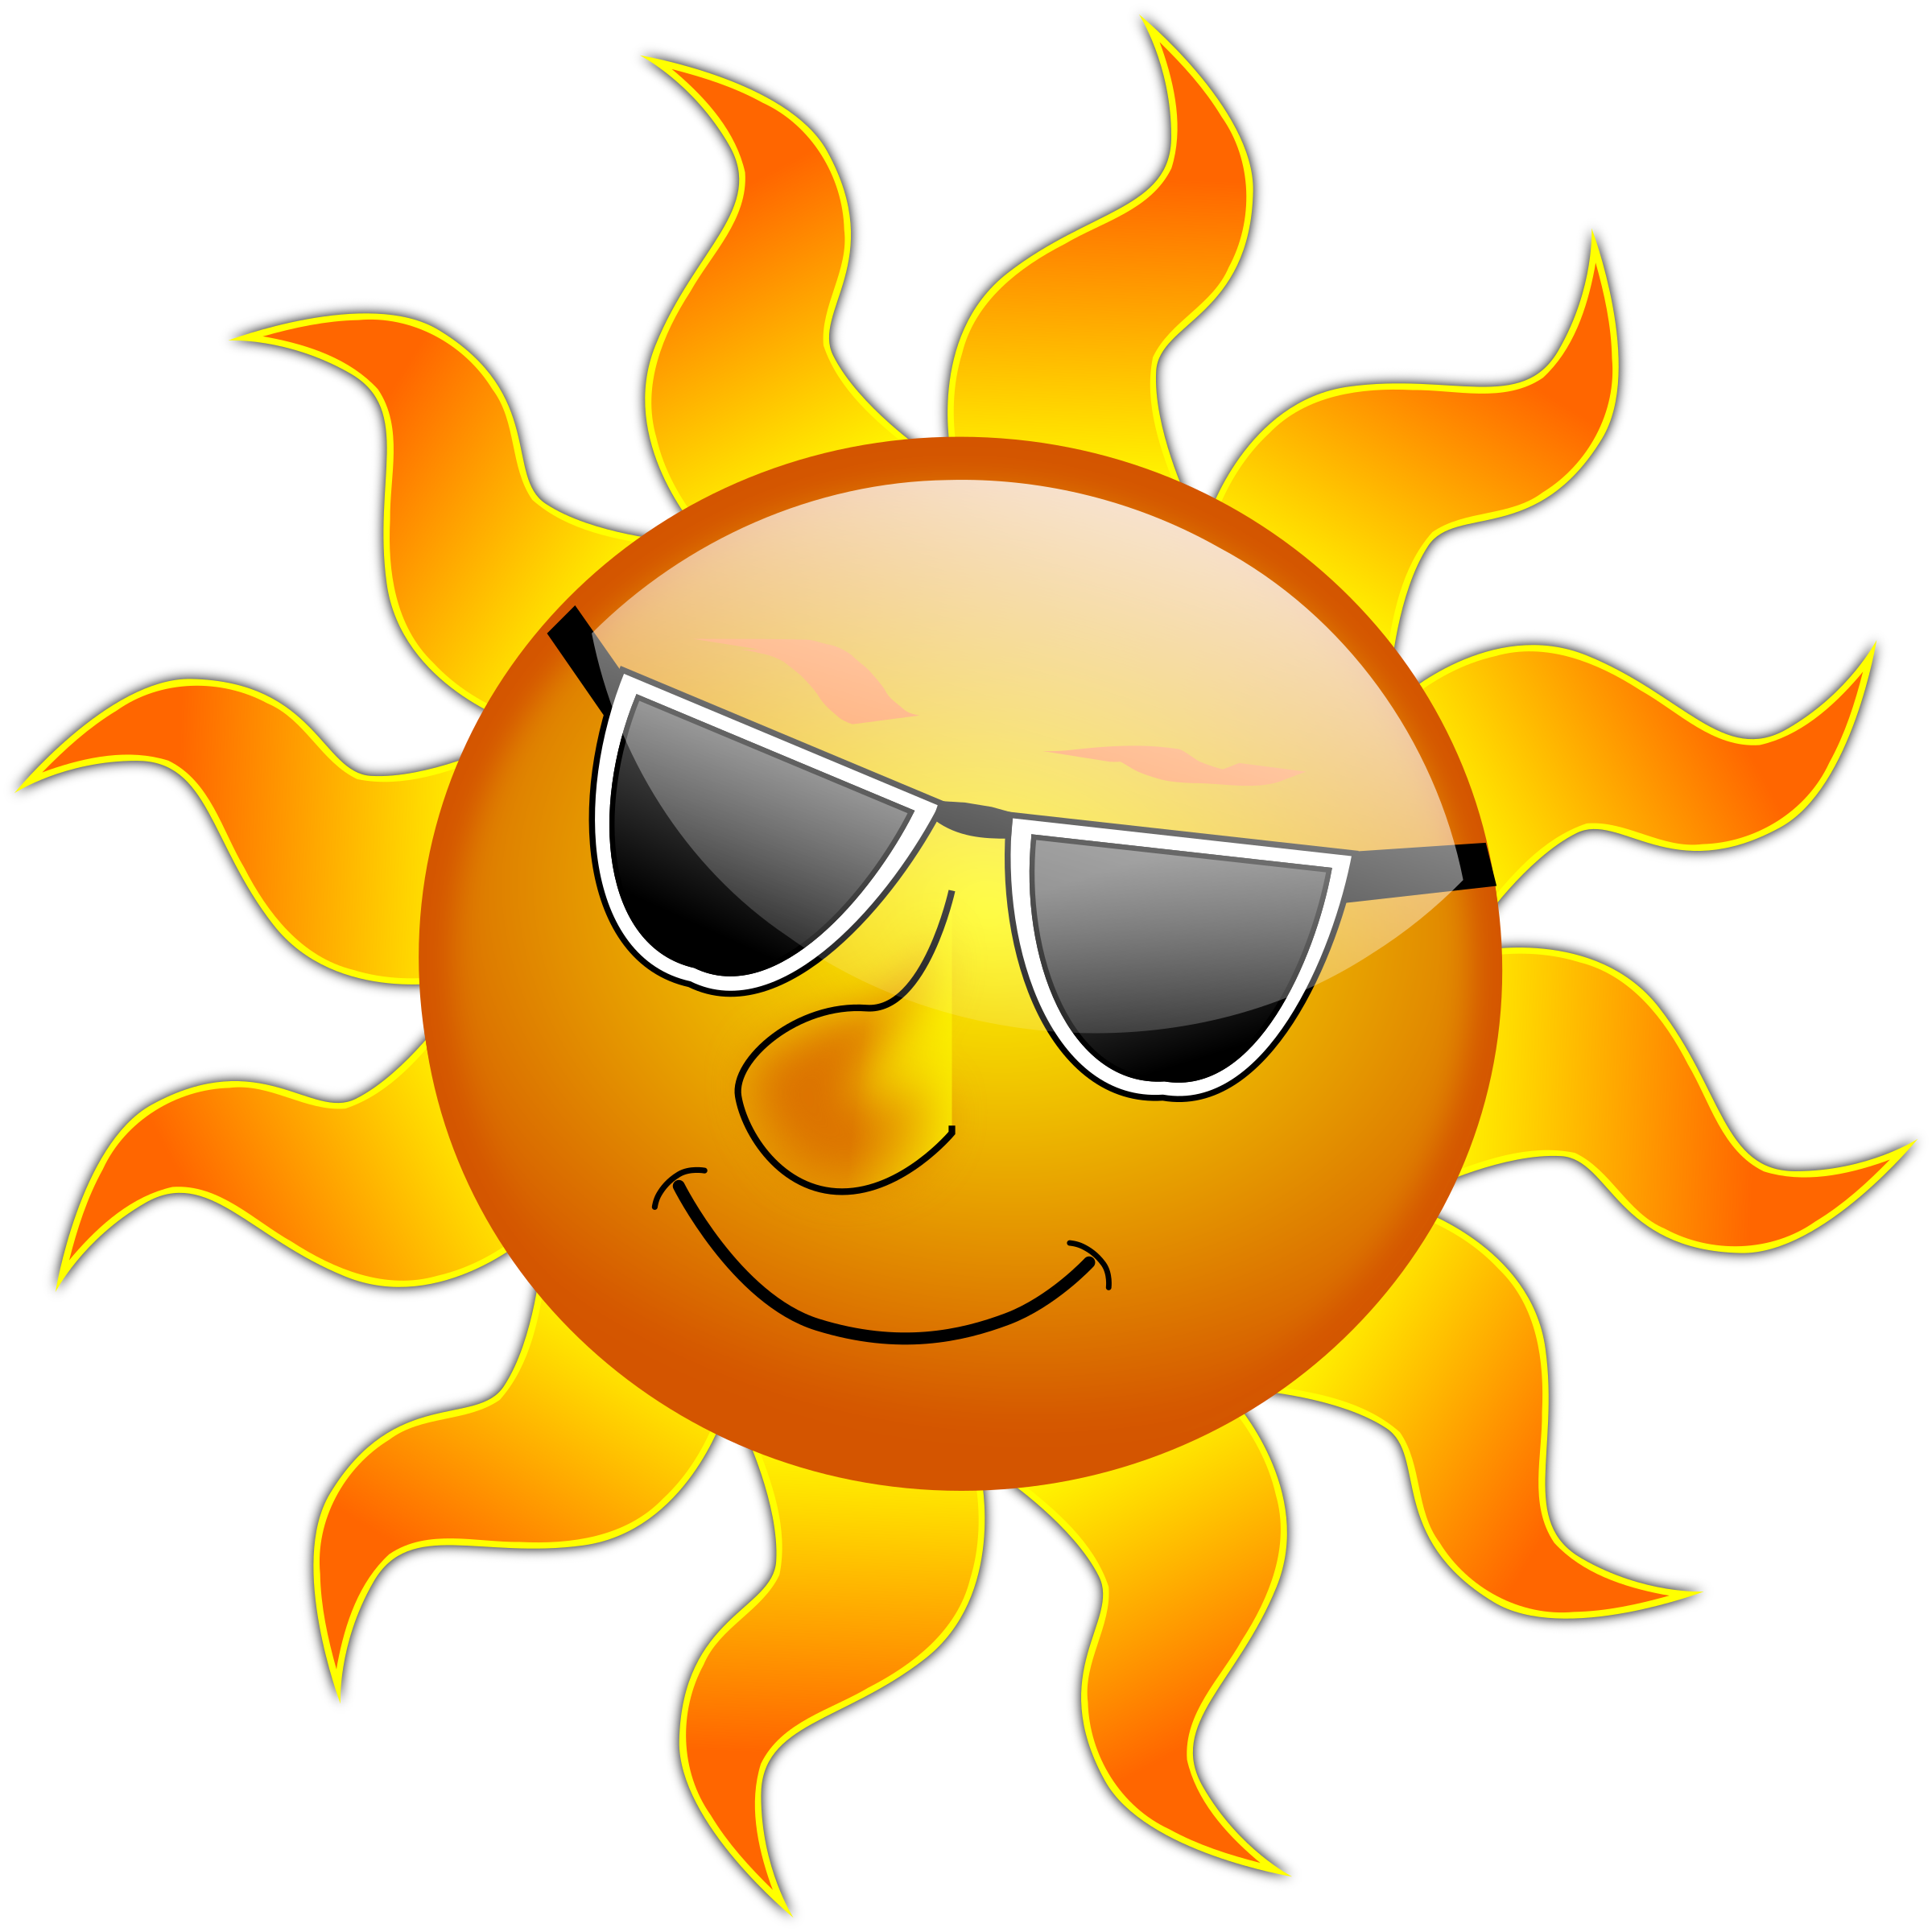 Union county offers sun. Wednesday clipart sunshine